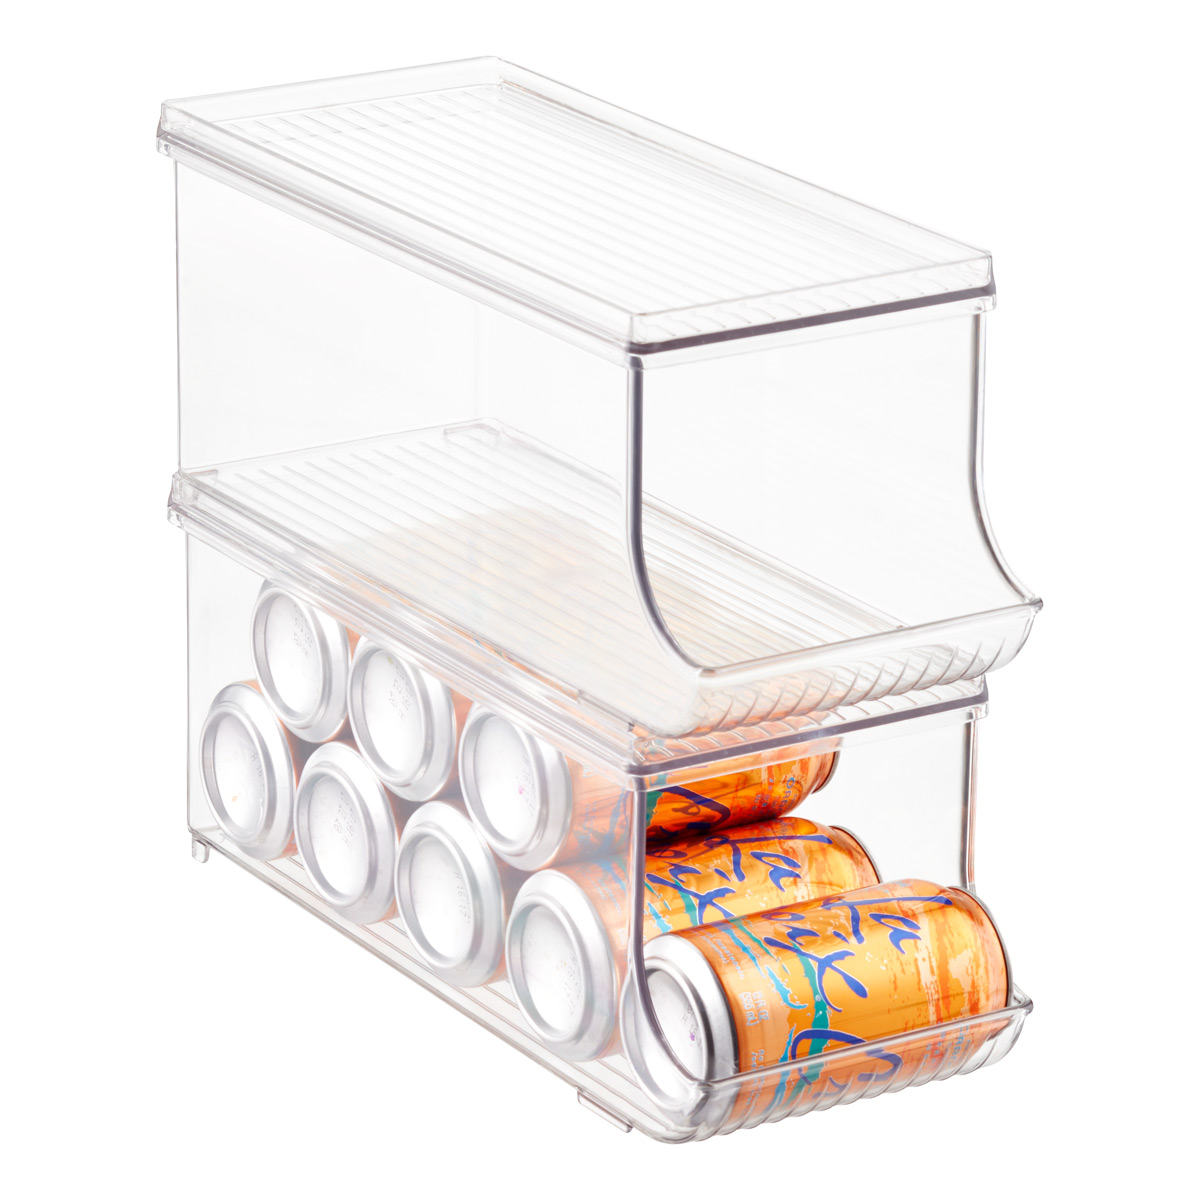 https://www.containerstore.com/catalogimages/308041/10071150-linus-soda-can-organizer-pl.jpg